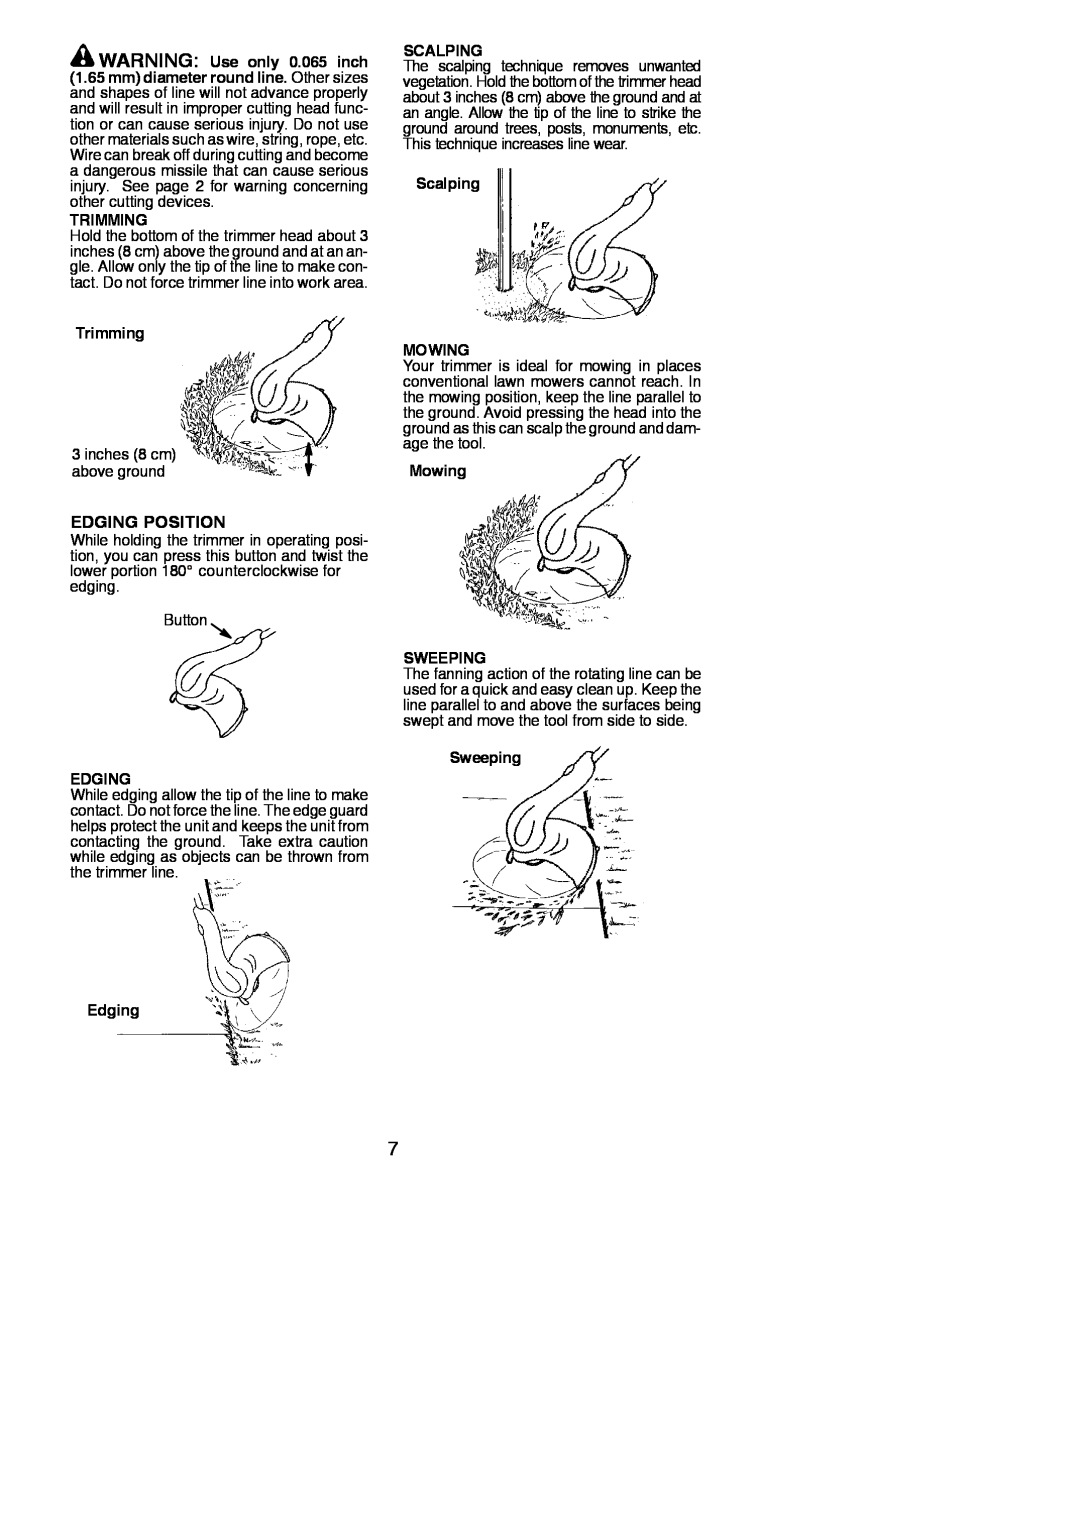 Weed Eater 115254226 instruction manual Edging Position, Trimming, Scalping MOWING, Mowing SWEEPING, Sweeping EDGING 